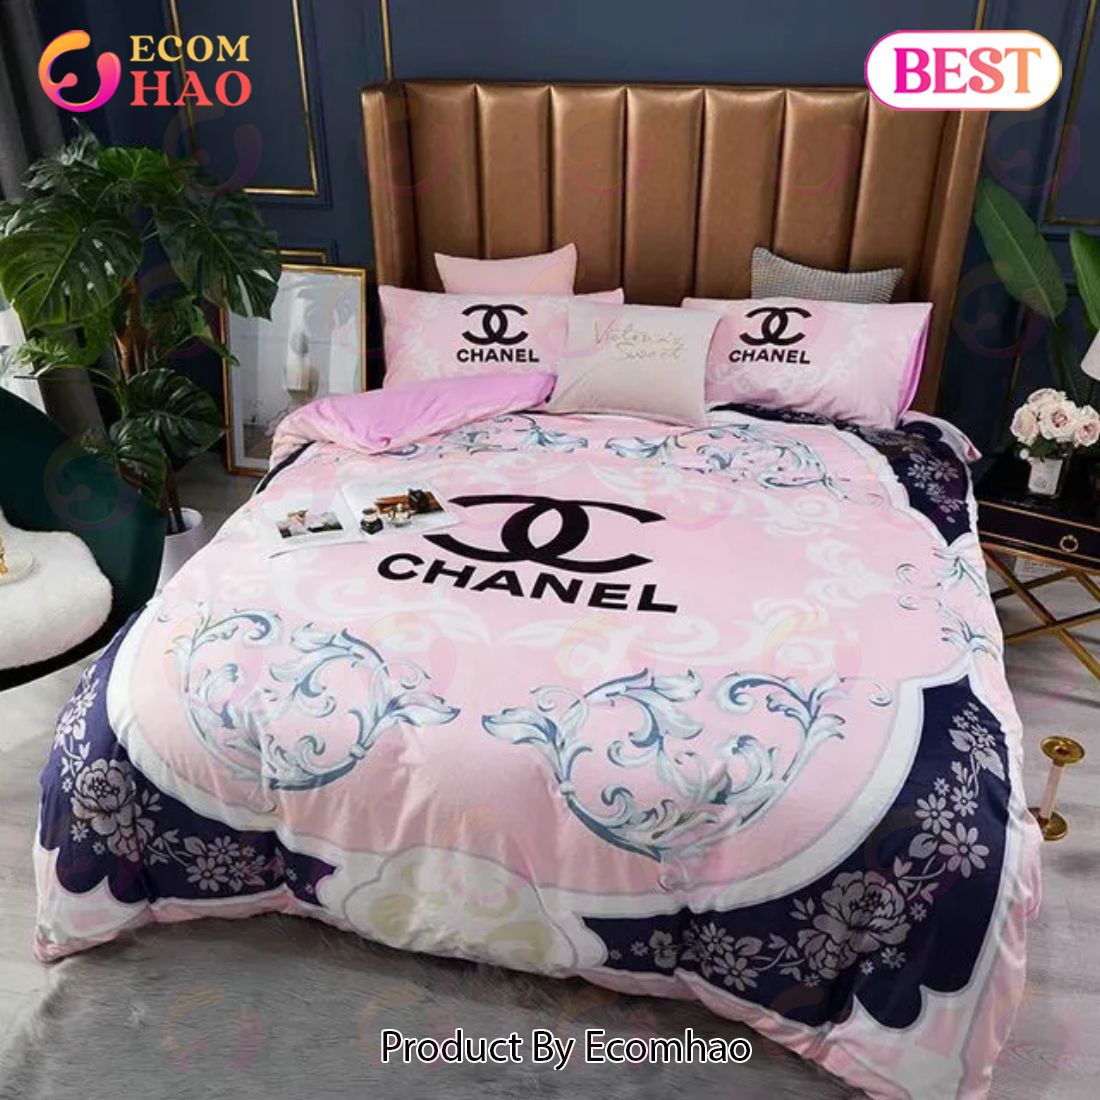 Chanel Beautiful Flowers Bedding 3D Printed Bedding Sets Quilt Sets Duvet Cover Luxury Brand Bedding Decor Bedroom Sets Best Luxury Bed Sets Gift Thankgivings And Christmas